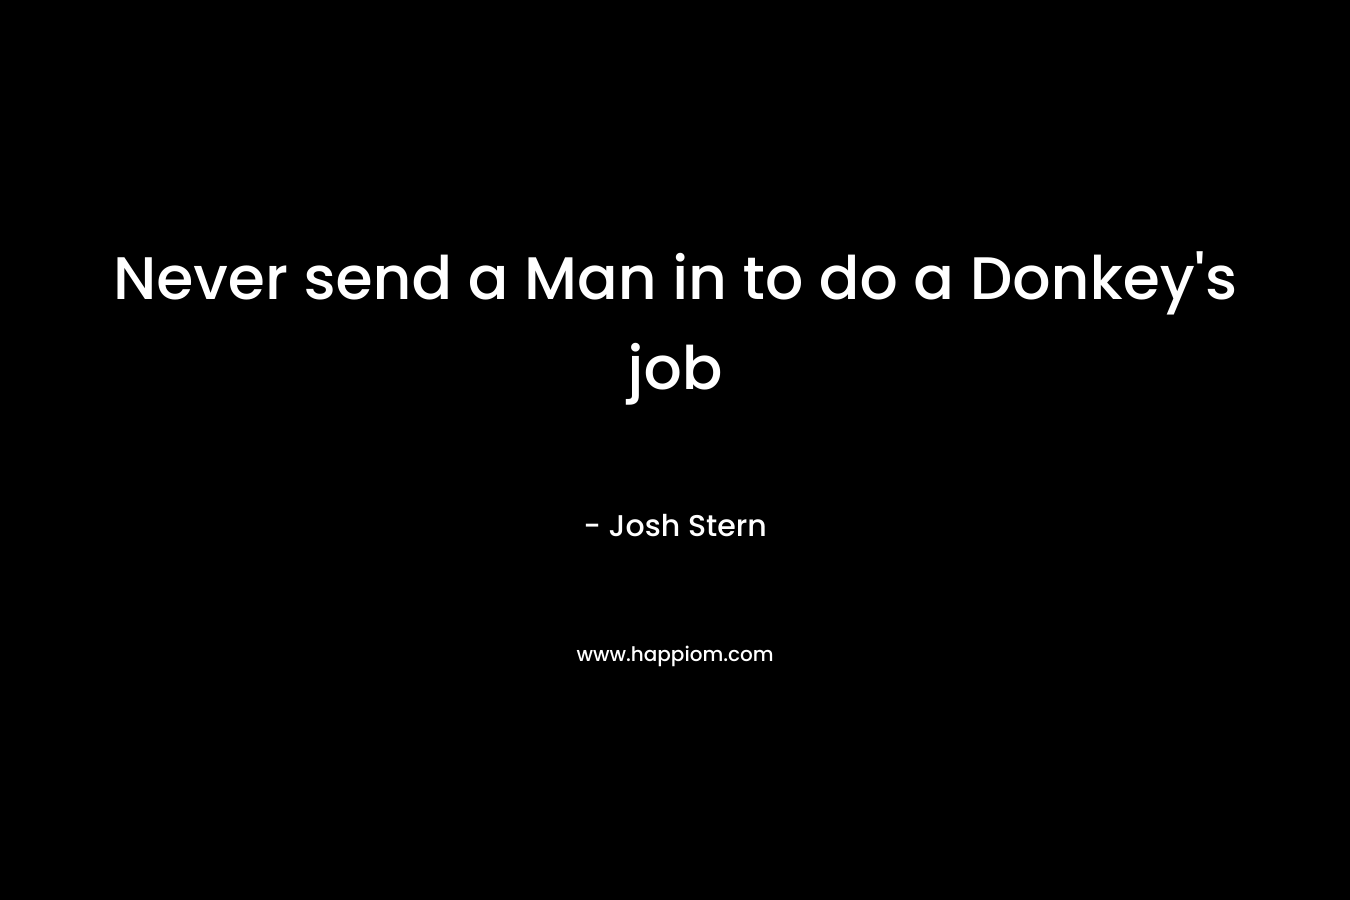 Never send a Man in to do a Donkey's job